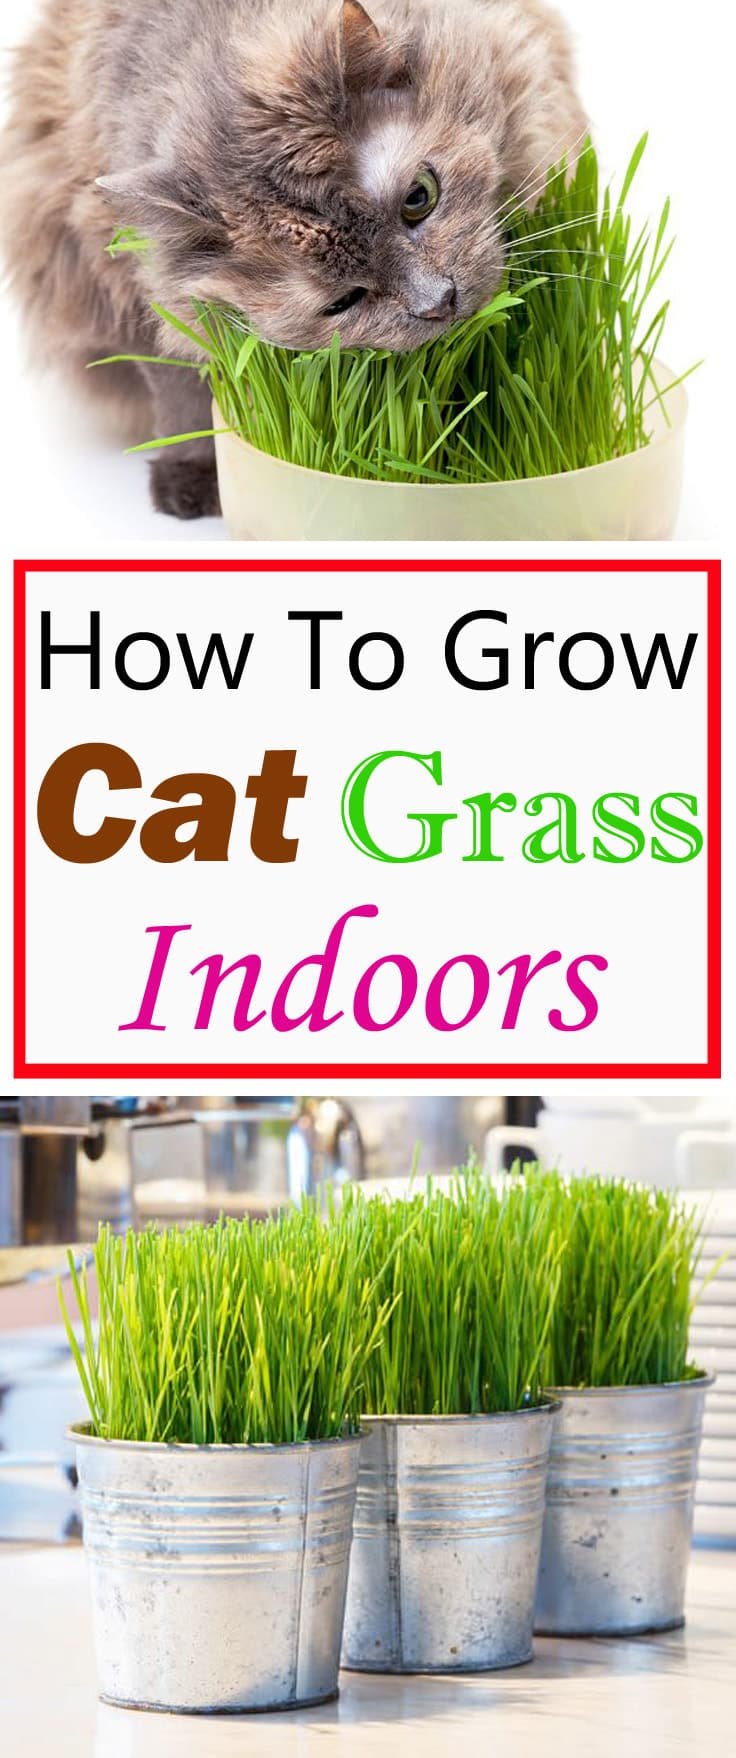 Growing cat grass indoors will keep your cats busy and entertain them. This way they don't need to go outside for grazing, where the grass may be treated with pesticides and fertilizer!